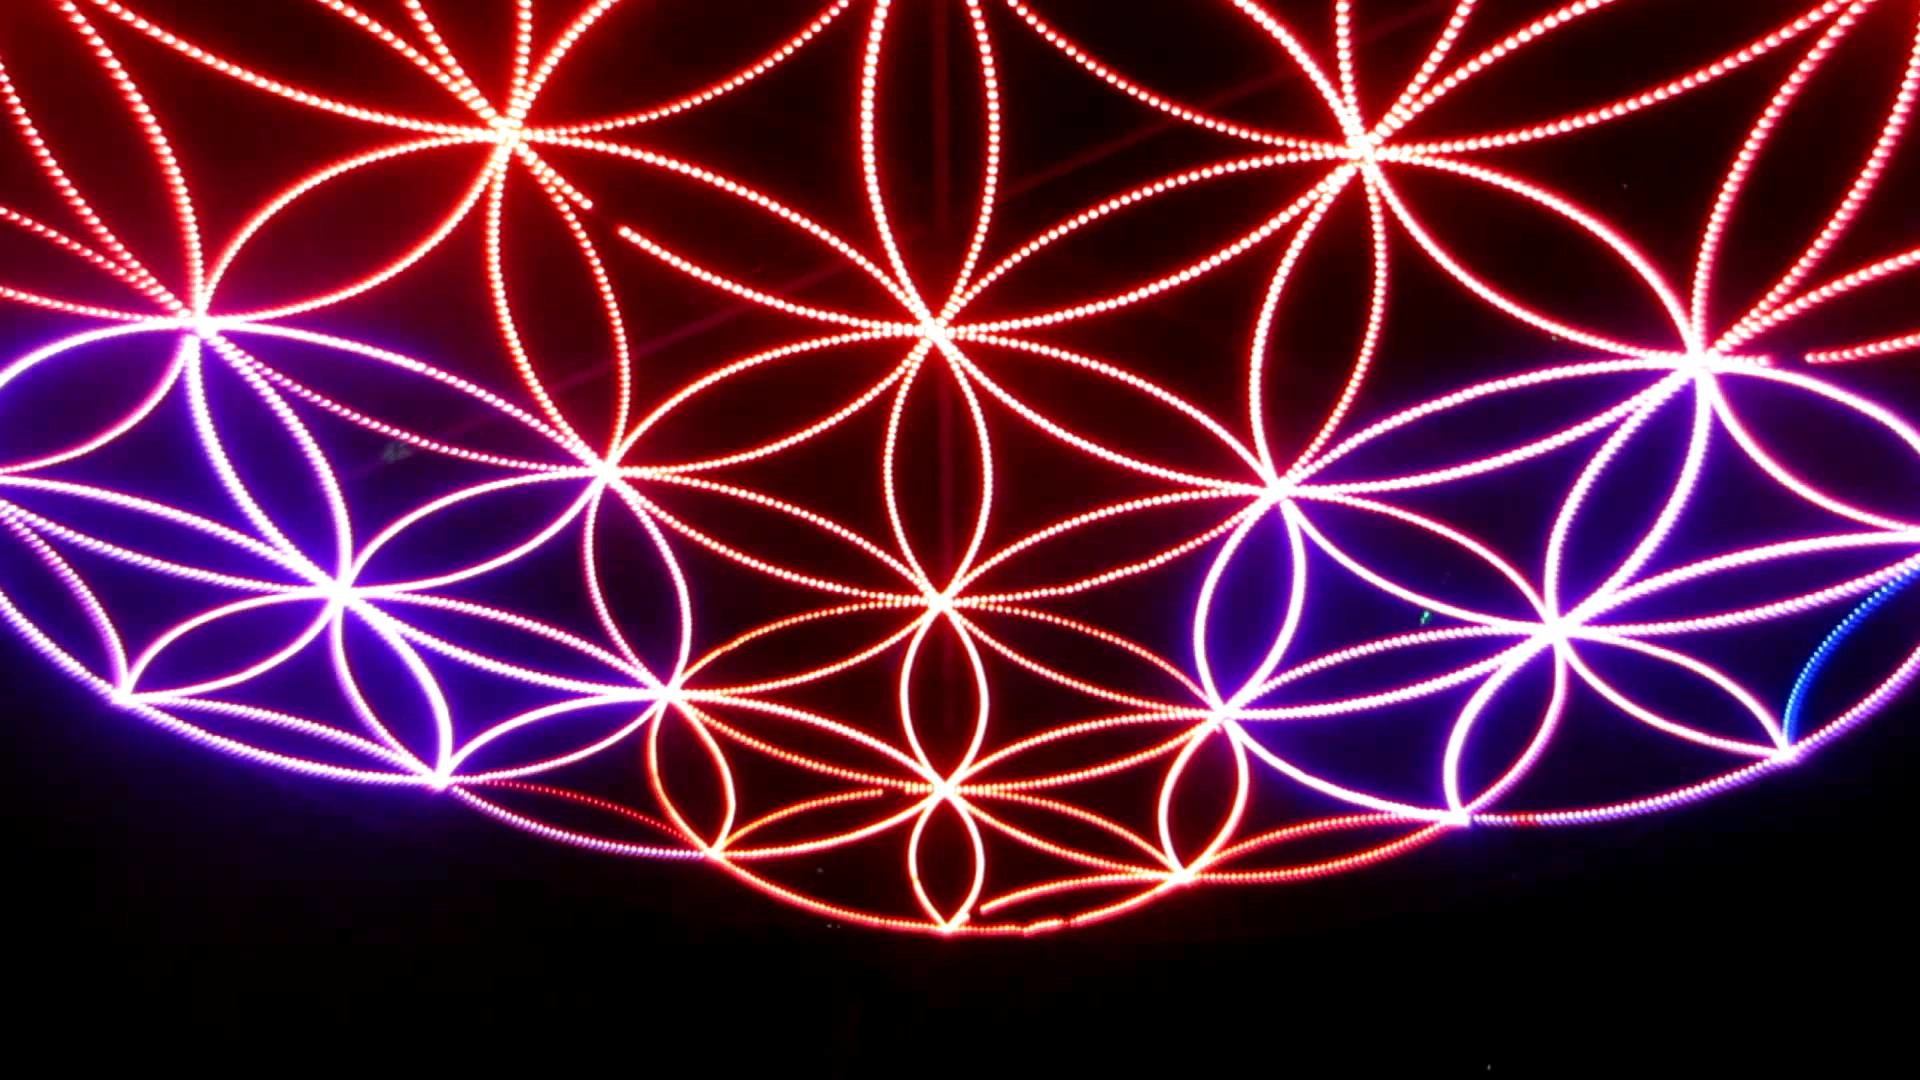 1920x1080 Flower of Life Art at Enchanted Forest Festival